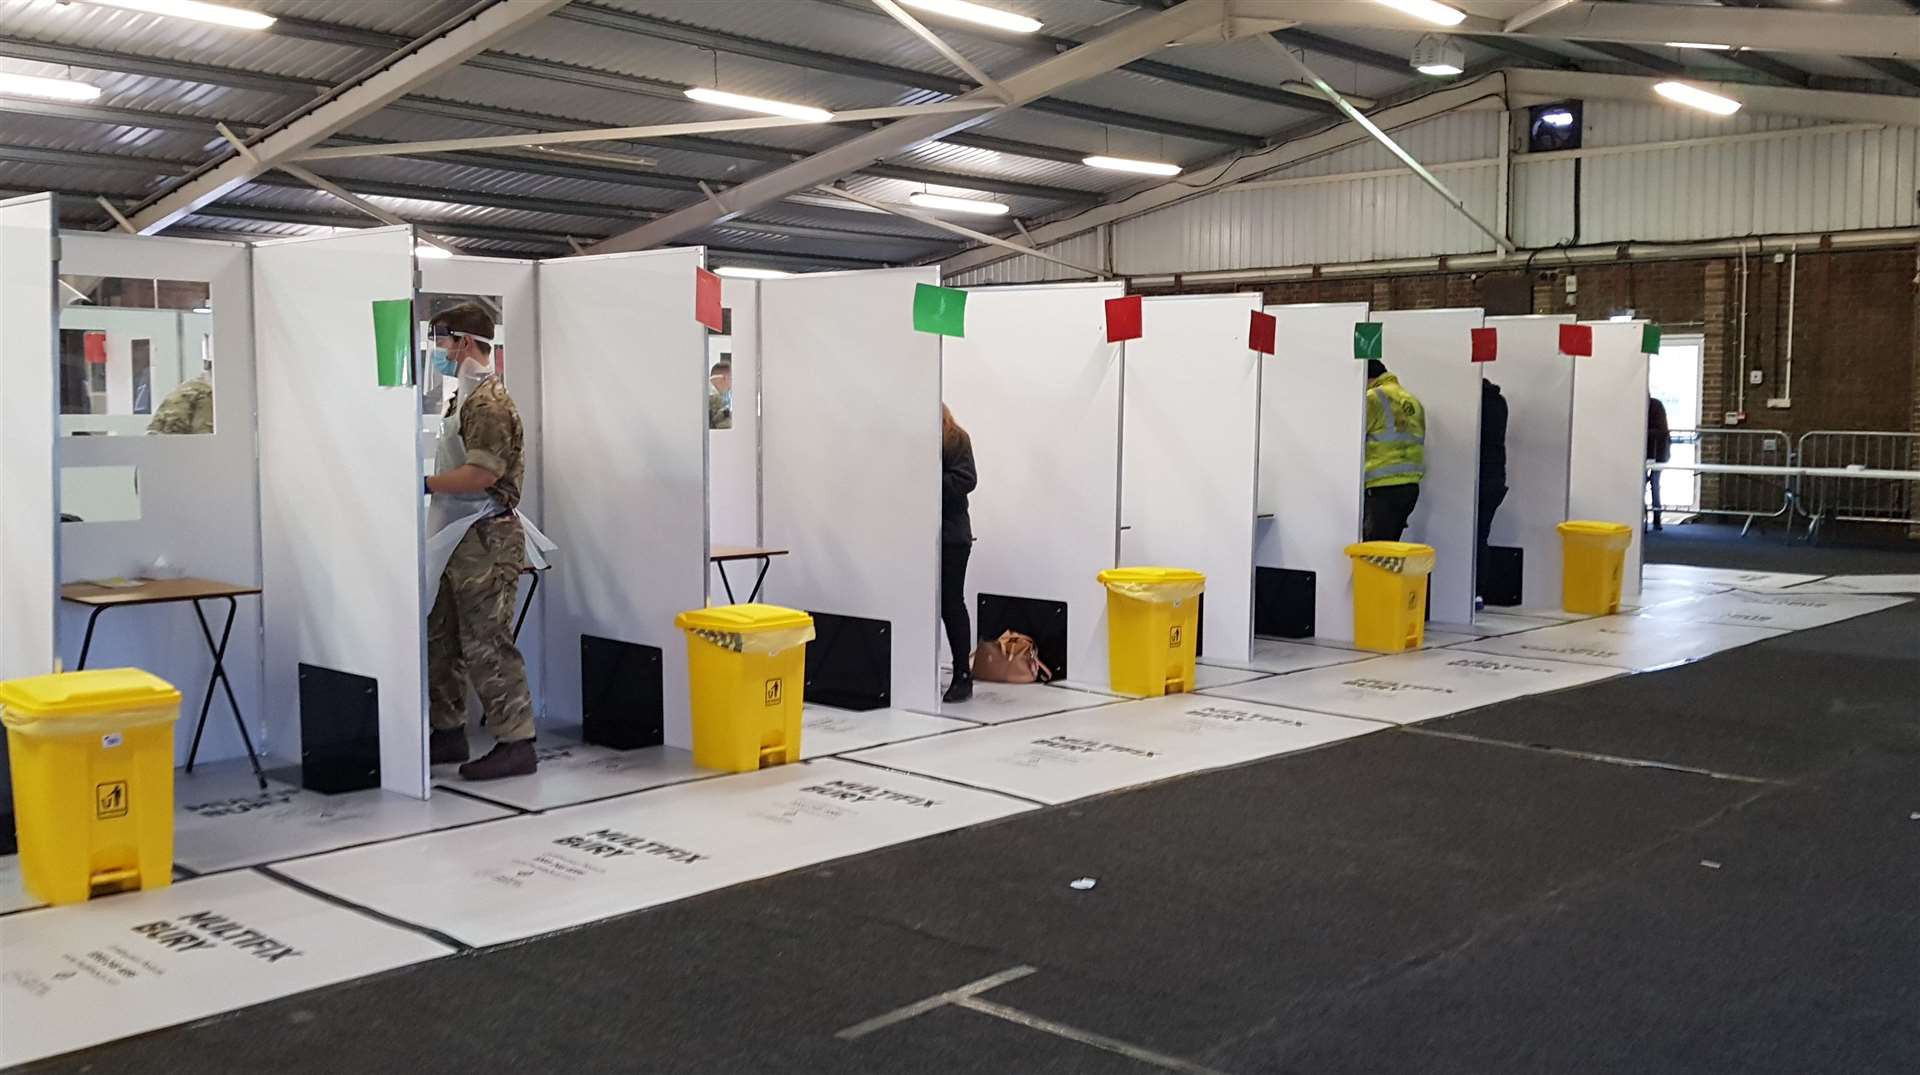 A symptom-free testing site operated by the military has opened in Detling